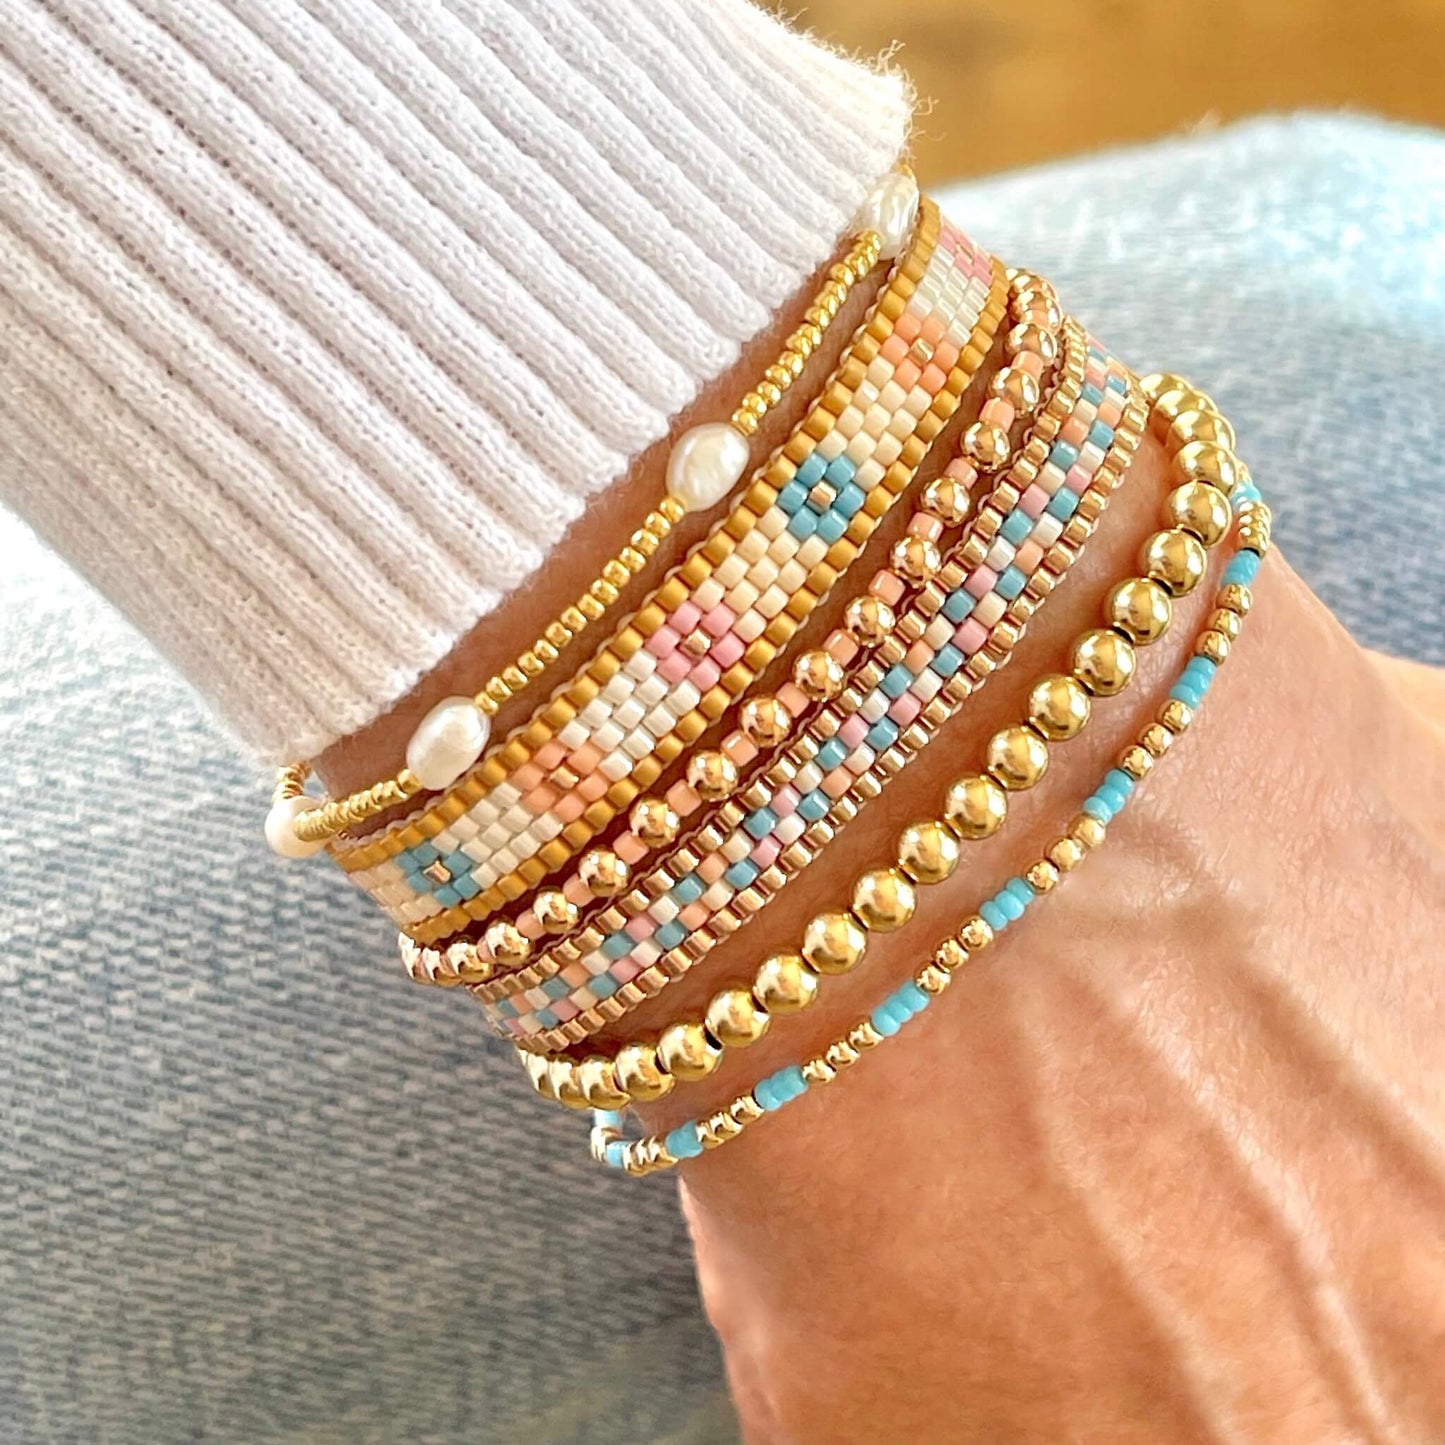 Gold Stretch Bracelets and Flat Beaded Bracelets. Bracelets Stacks & Singles with fresh water pearl bracelets and pastel seed beads.